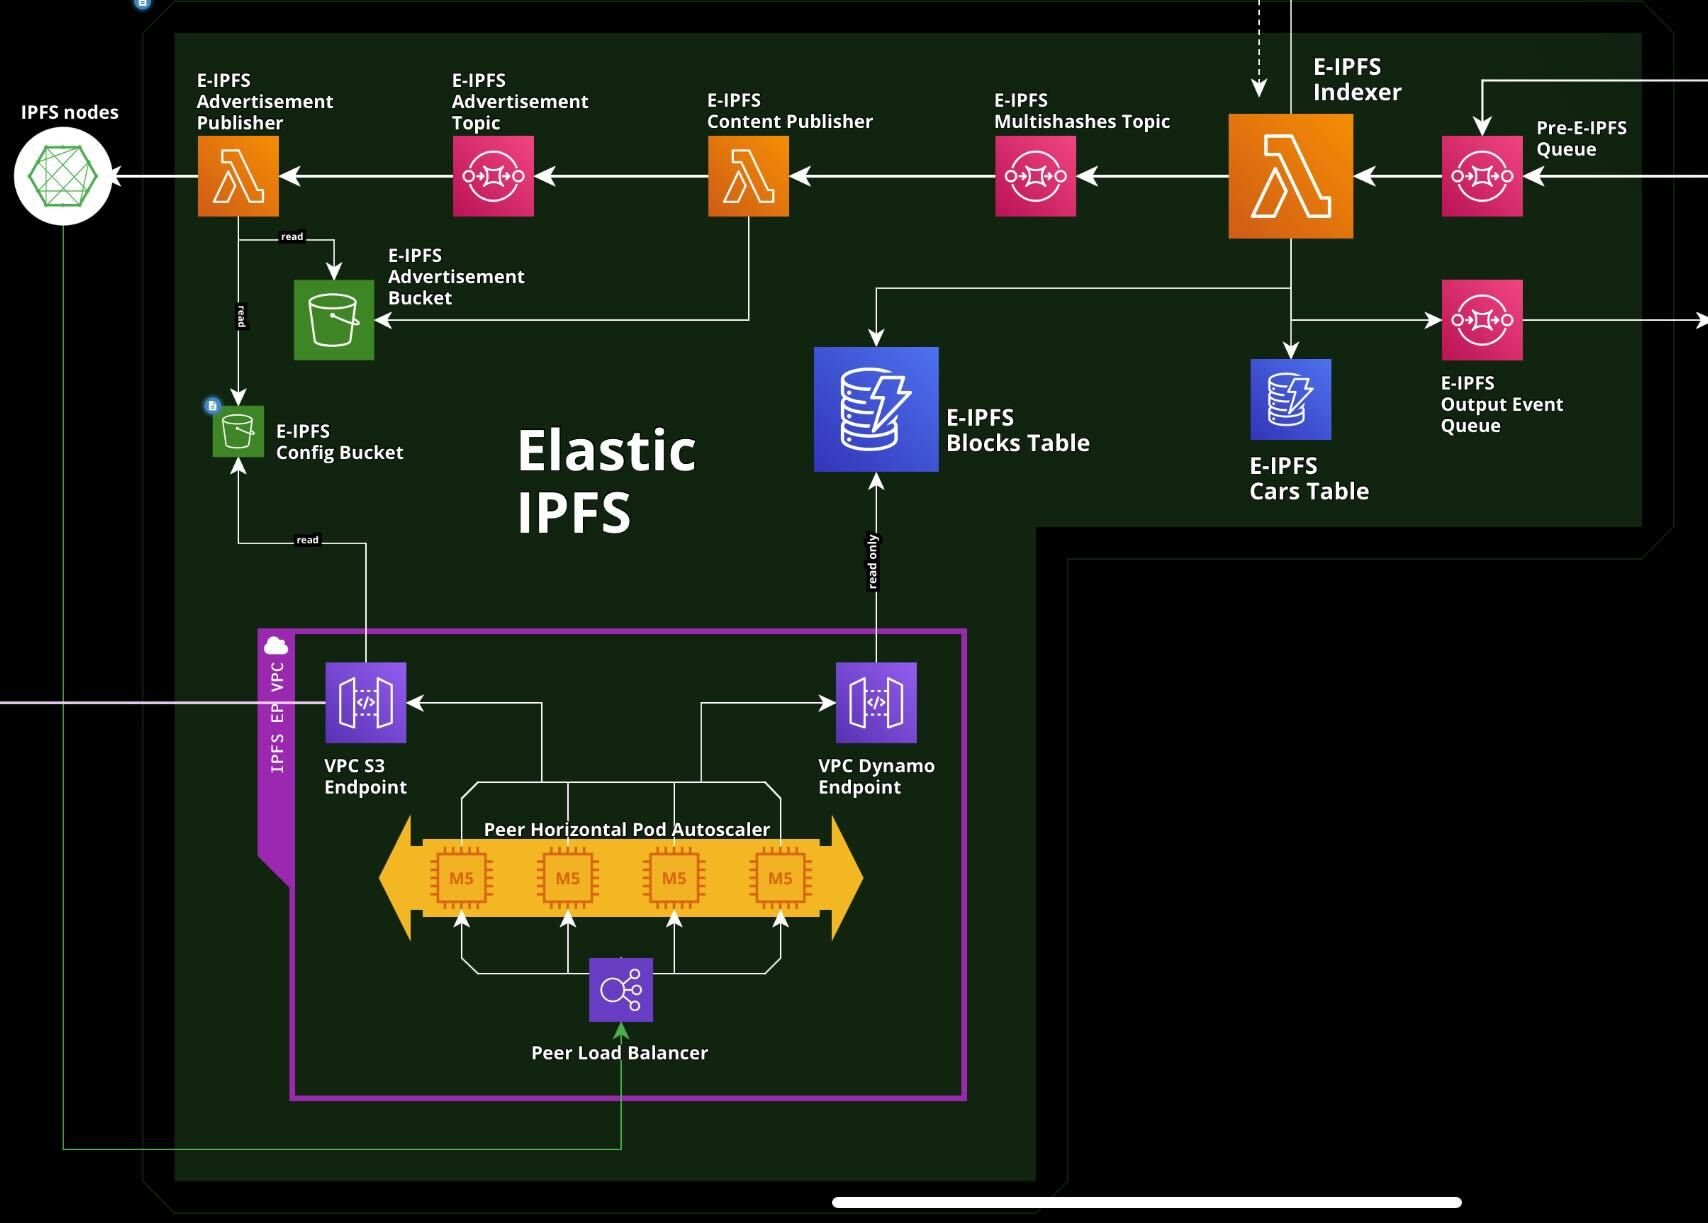 Architecture diagram of the current Elastic IPFS implementation in AWS.